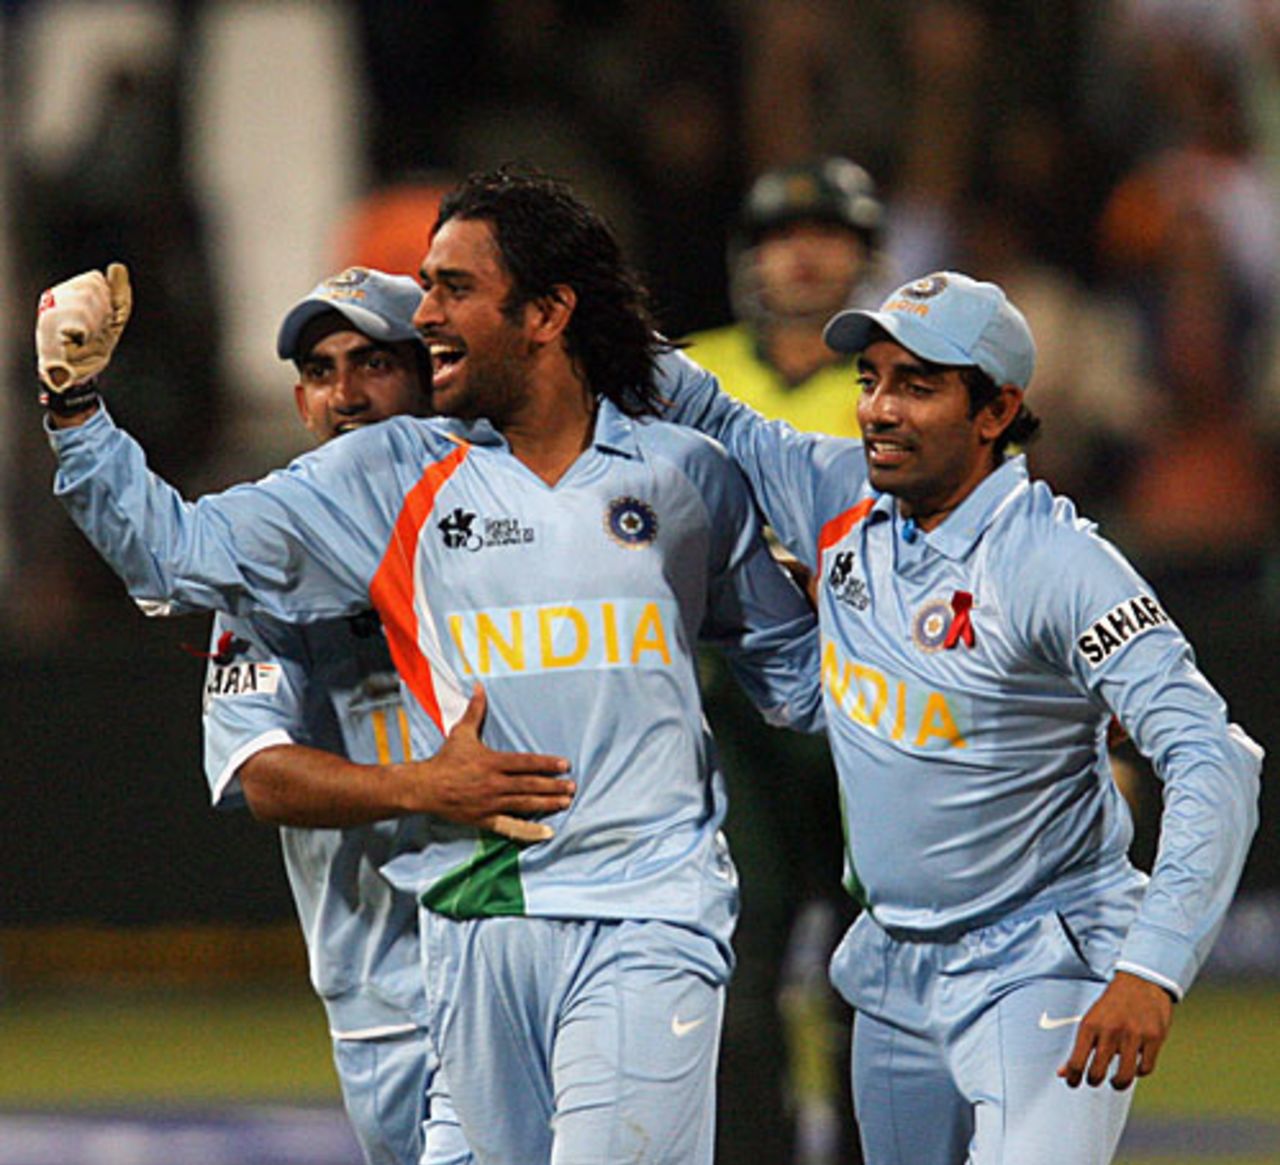 Mahendra Singh Dhoni is ecstatic after winning his first international match as captain, India v Pakistan, Group D, ICC World Twenty20, Durban, September 14, 2007